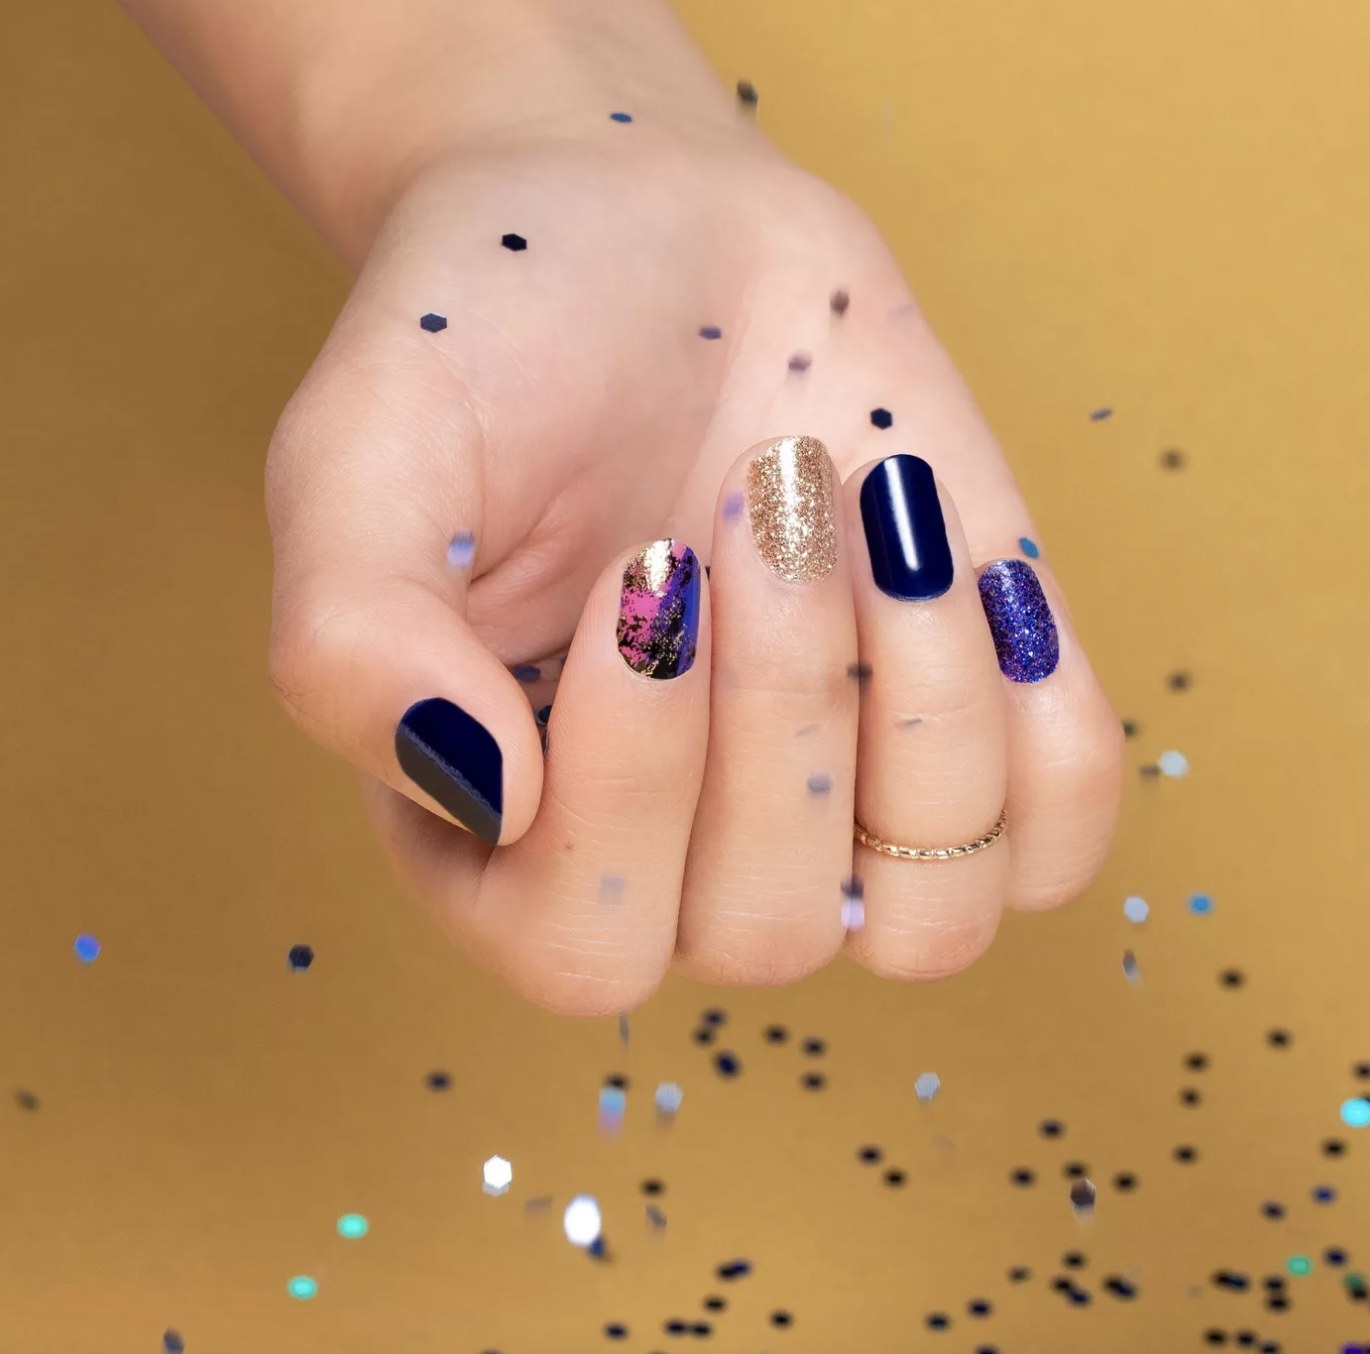 A person showing off a blue, sparkly manicure while holding silver confetti strips